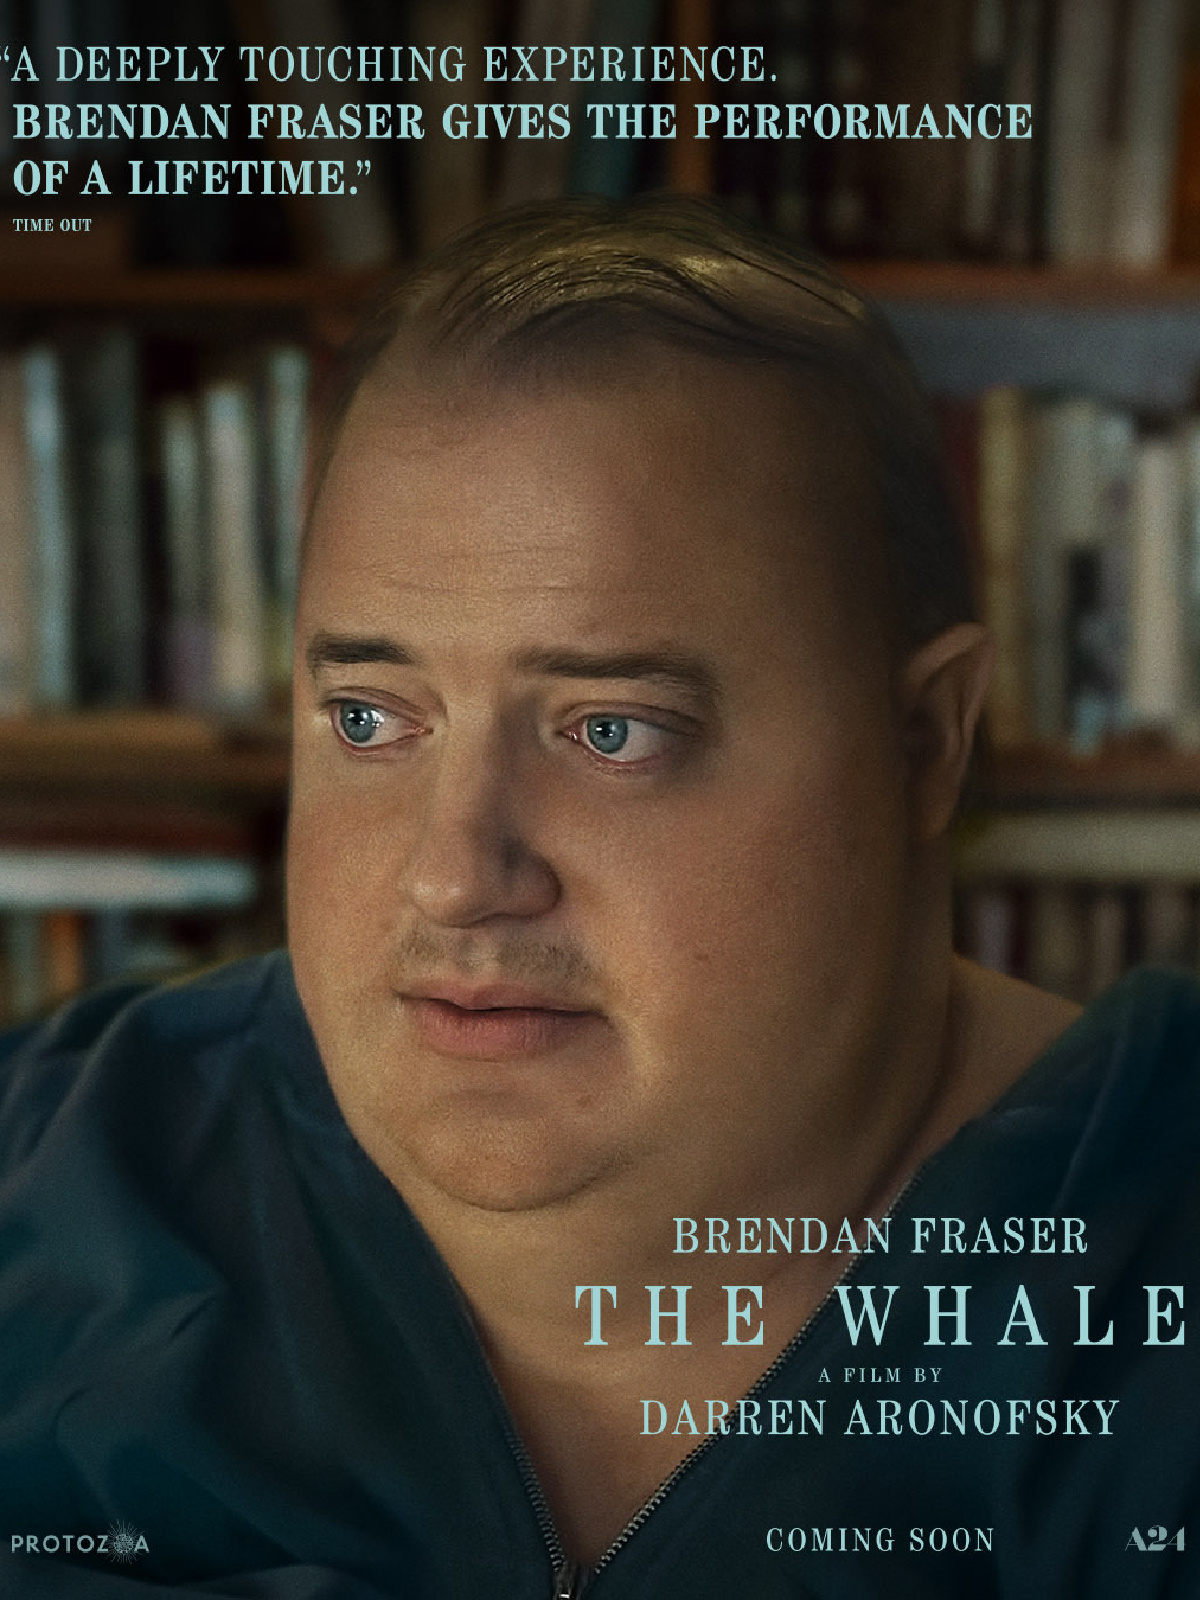 Director Darren Aronofsky's 'The Whale' from A24 opens in theaters on December 9th, 2022.